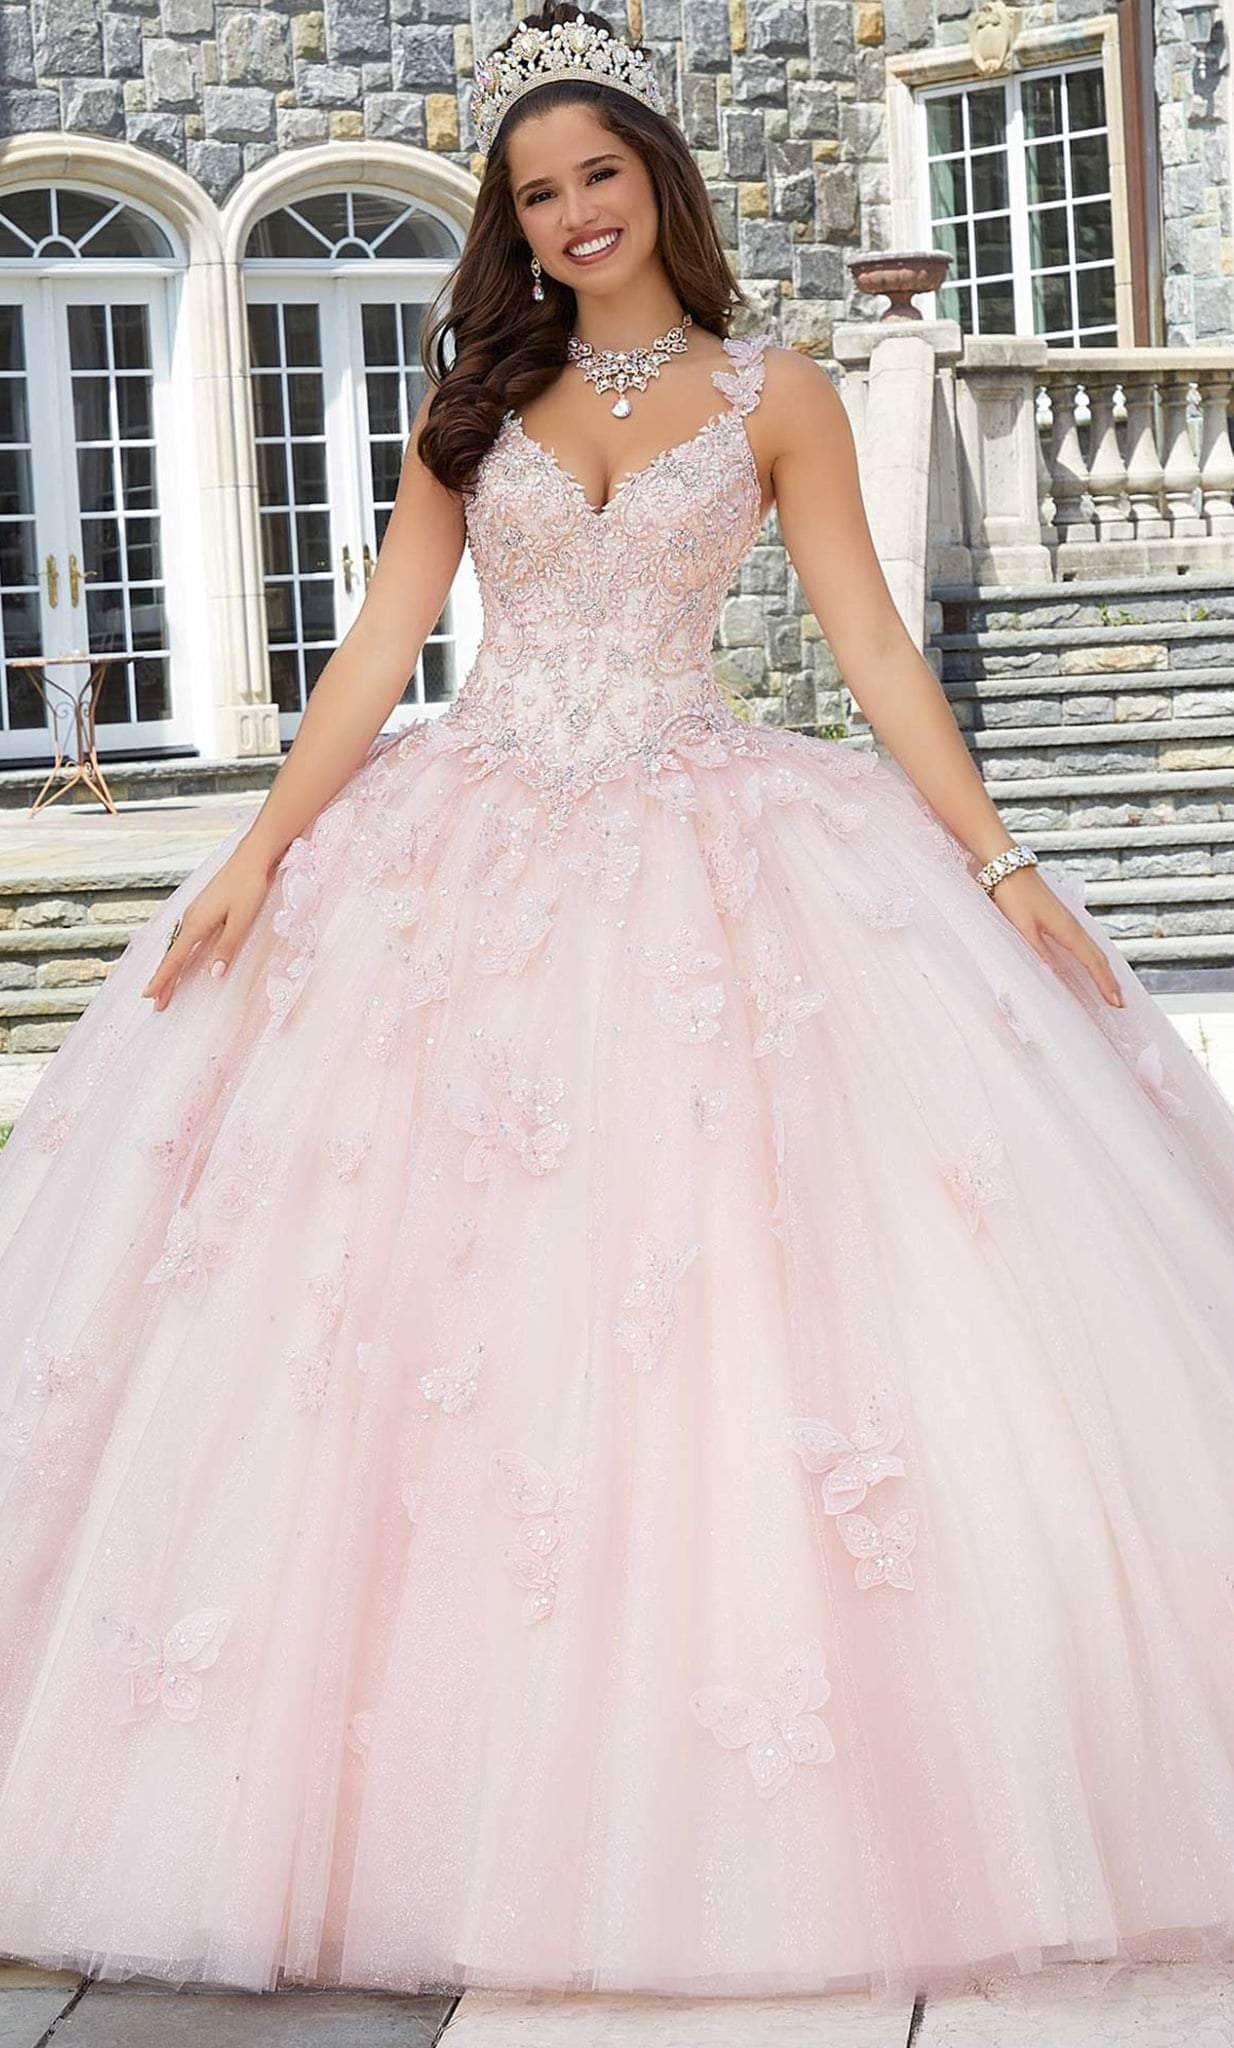 Vizcaya by Mori Lee 34084 - Glittered Tulle Ballgown
